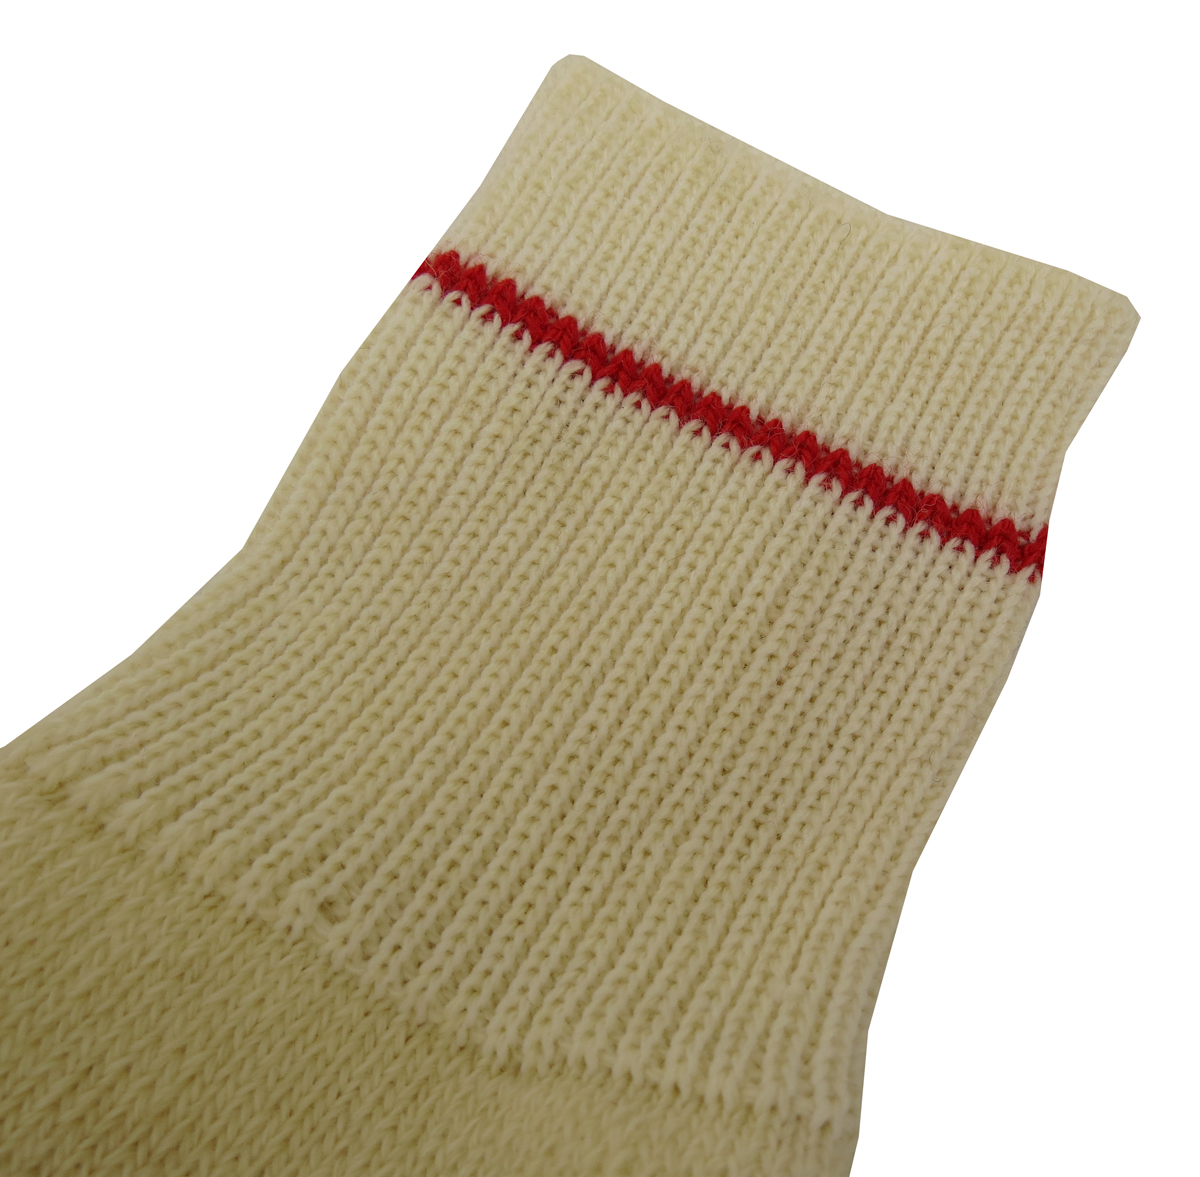 British Army ECW EXTREME COLD WEATHER UNDYED WOOL SOCKS 